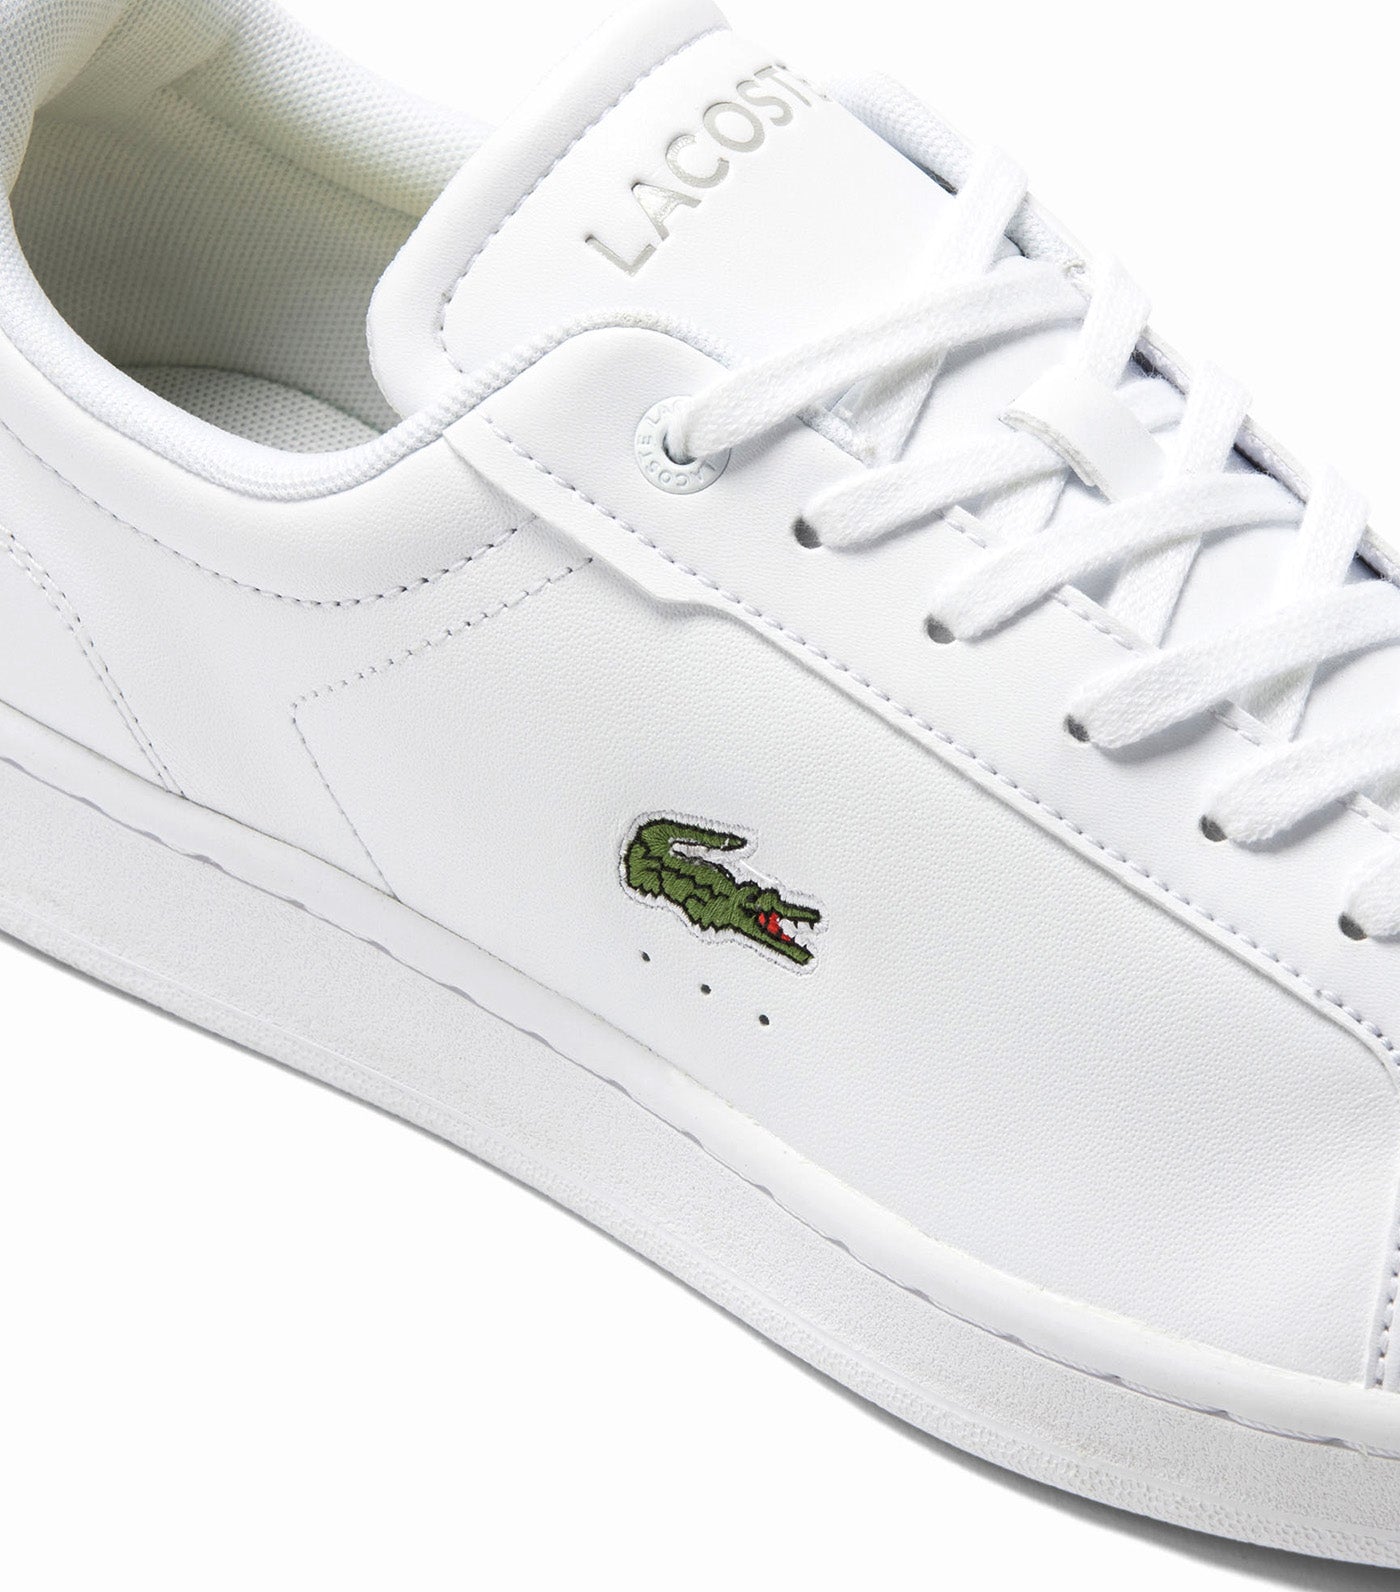 Men's Lacoste Carnaby Pro BL Leather Tonal Sneakers White/White